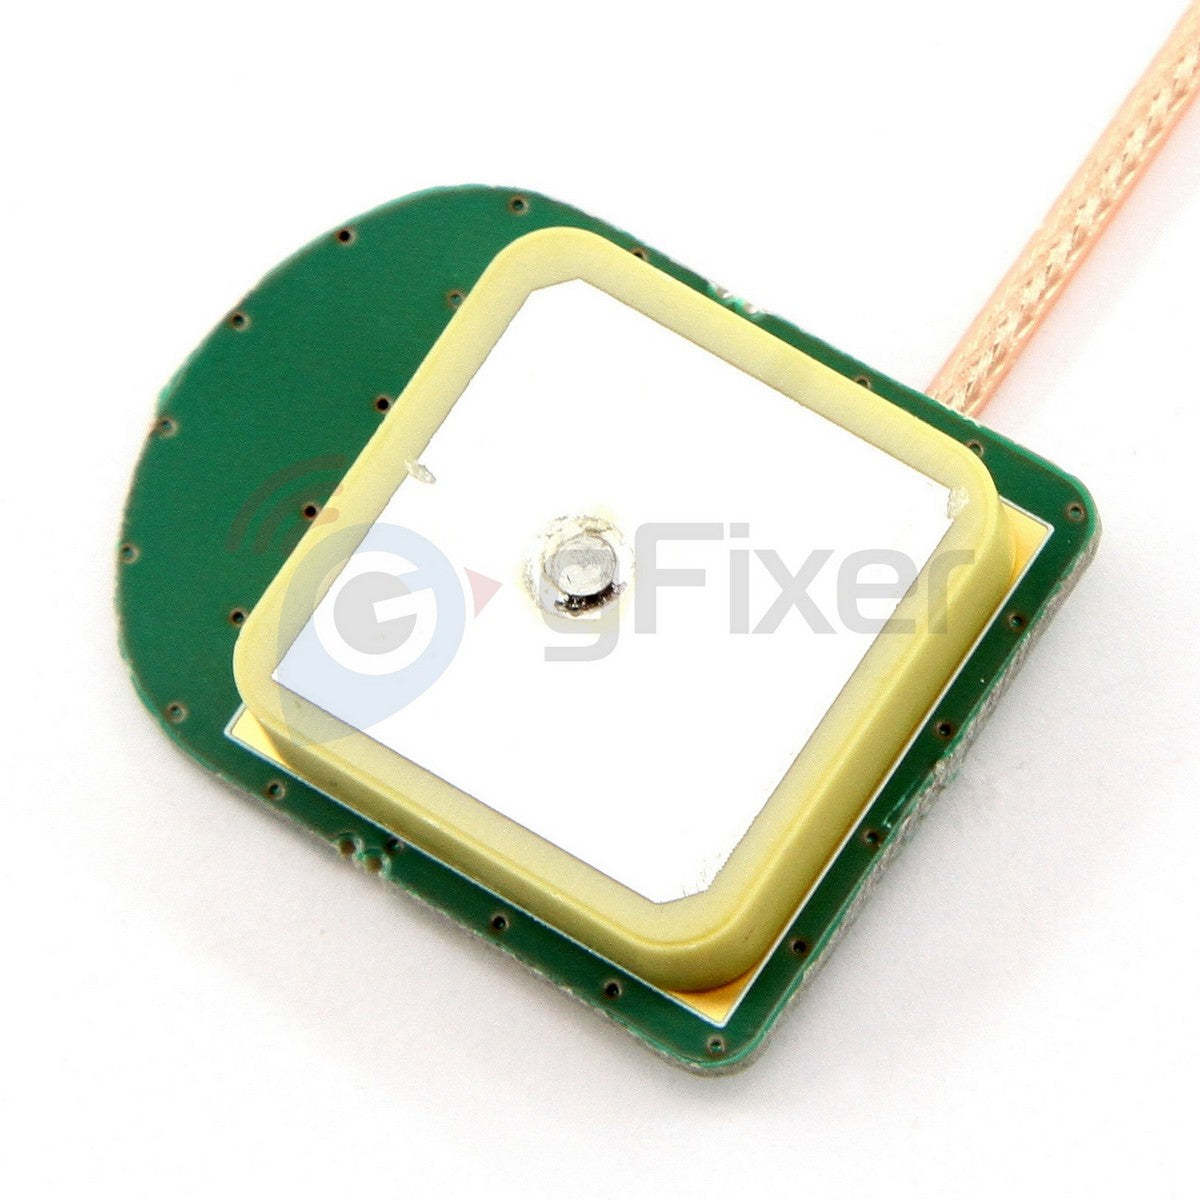 New PCB GPS Antenna with cable for collar Garmin DC 40 part repair DC40 module